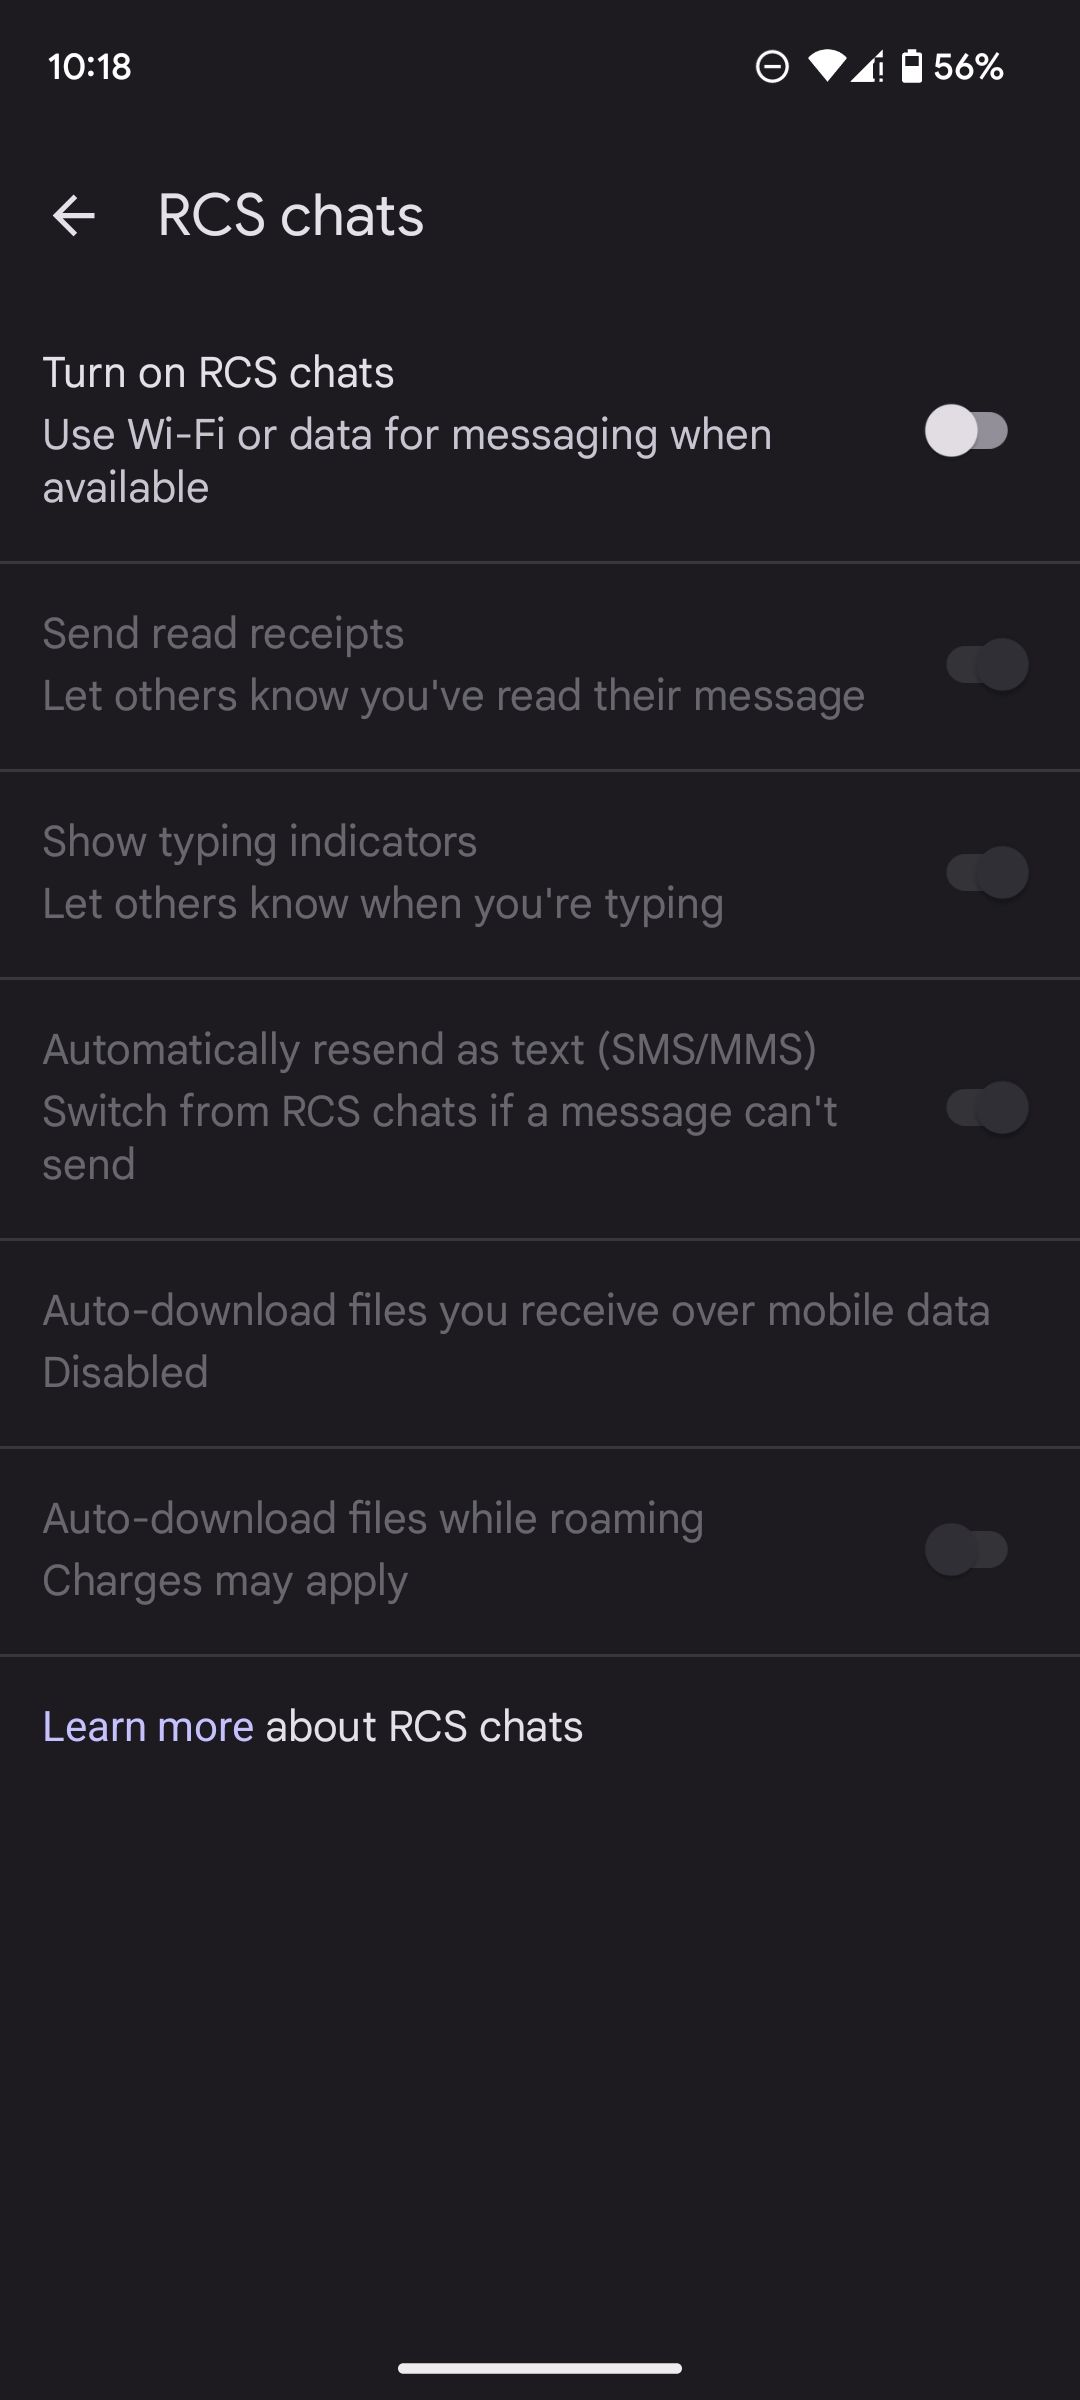 Toggle for enabling RCS chats on Android in Google Messages